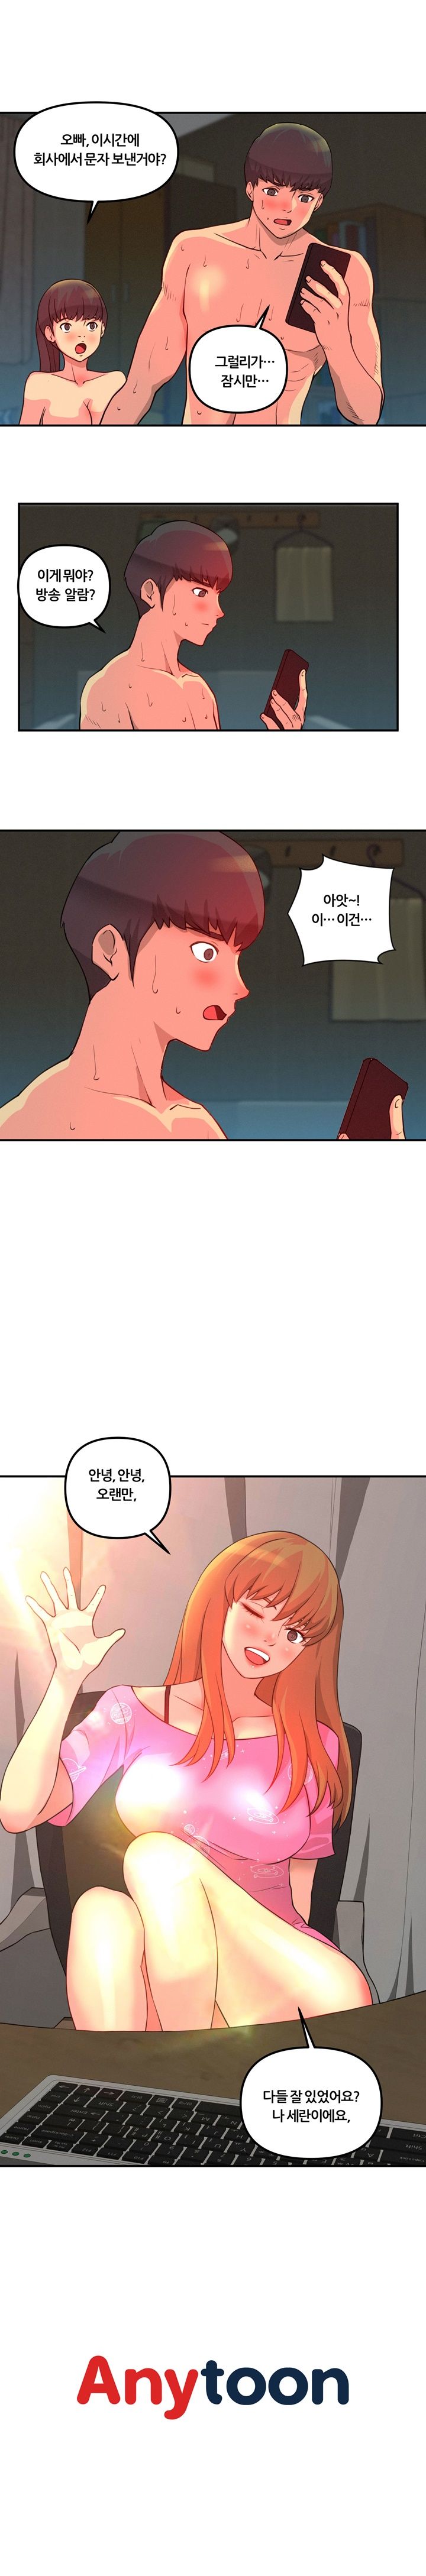 Her Vlog Raw - Chapter 2 Page 25